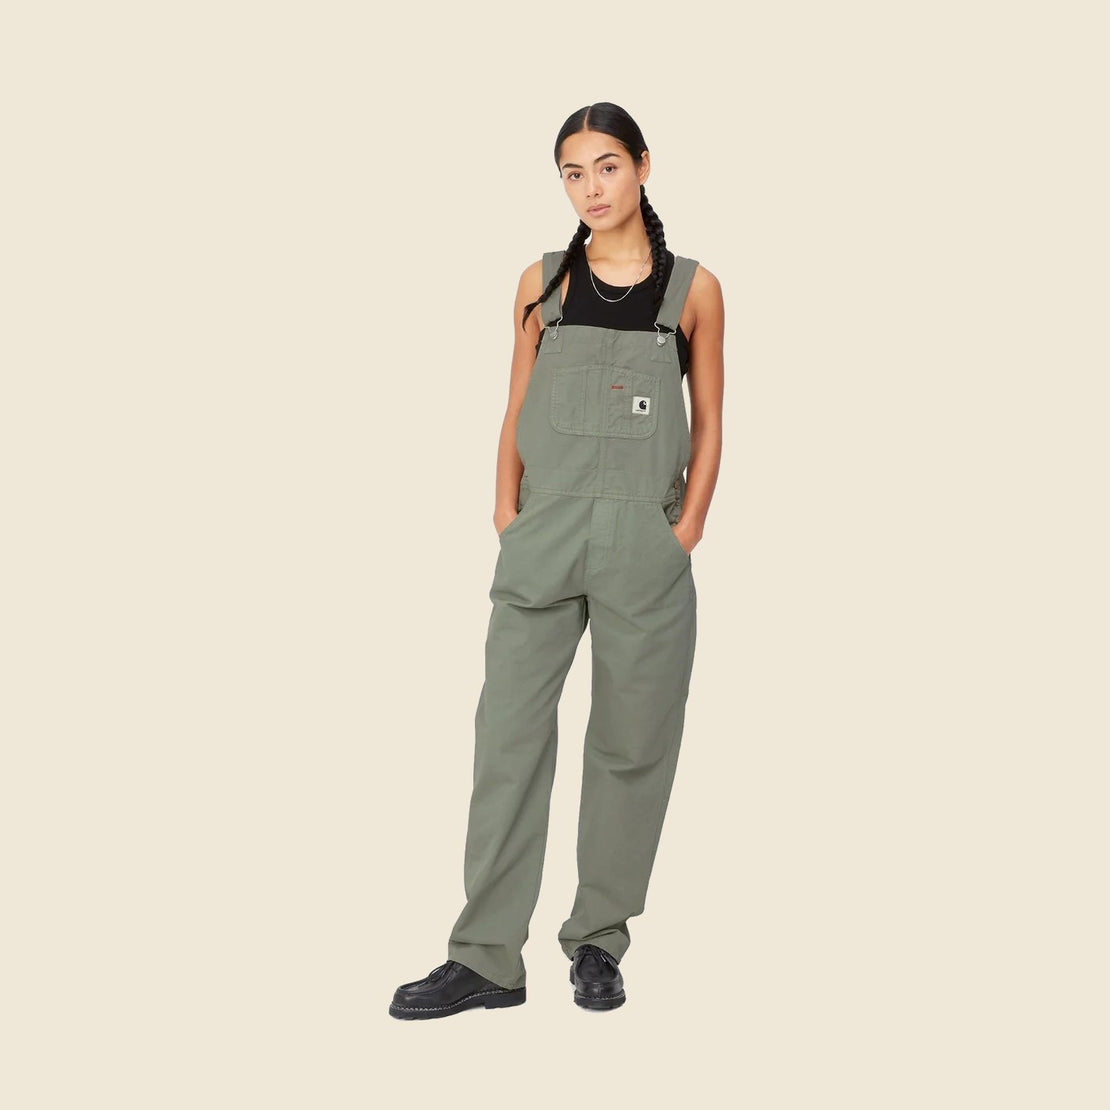 Bib Overall Straight - Yucca - Carhartt WIP - STAG Provisions - W - Onepiece - Overalls